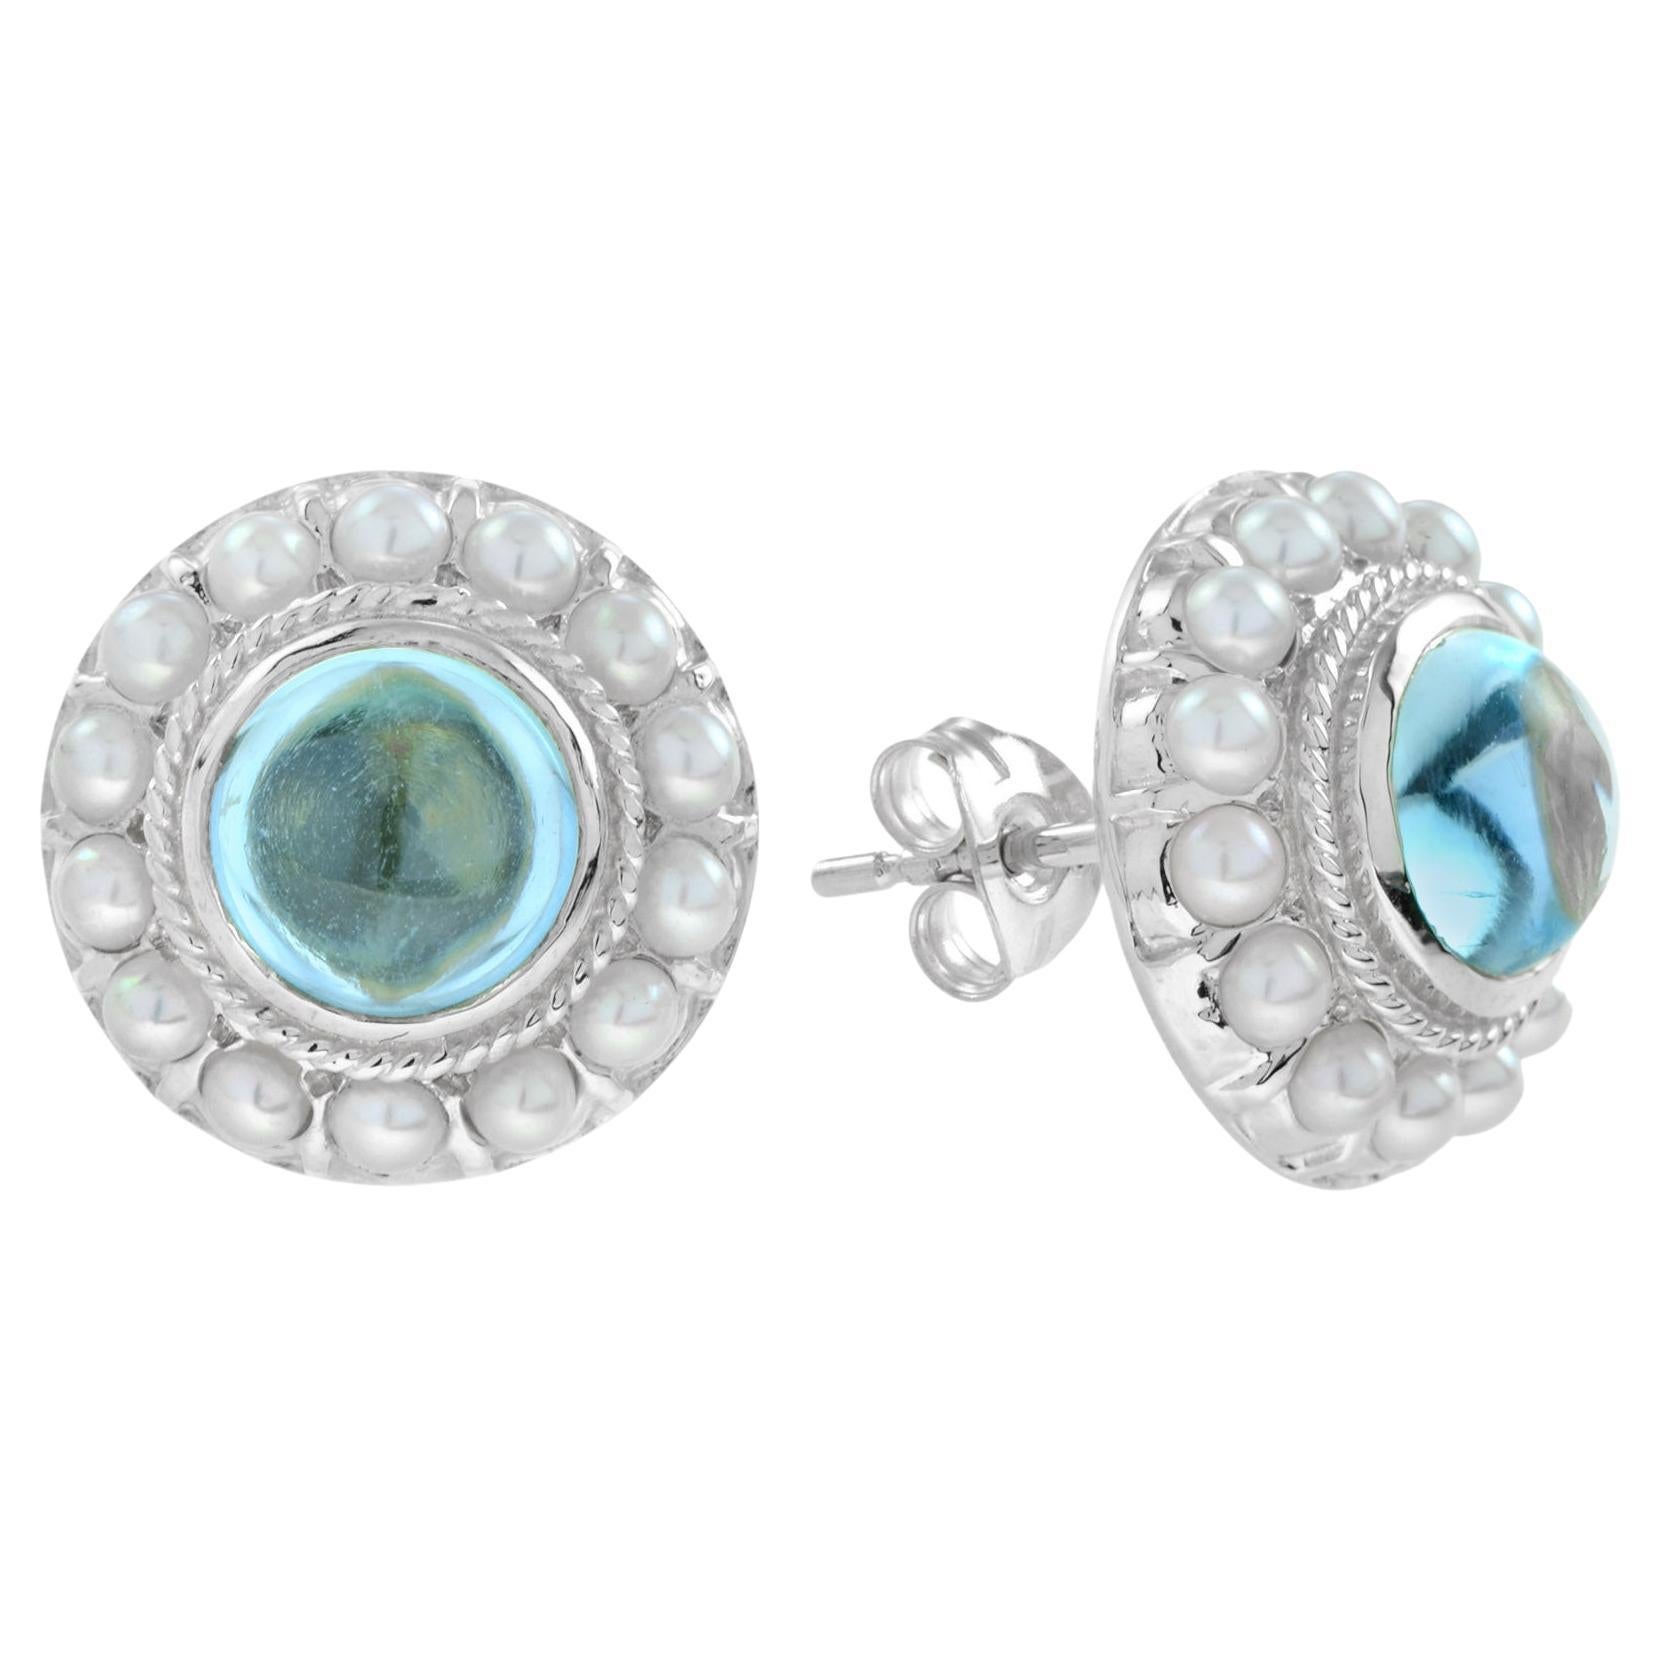 Cabochon Blue Topaz and Pearl Halo Stud Earrings in 14K White Gold